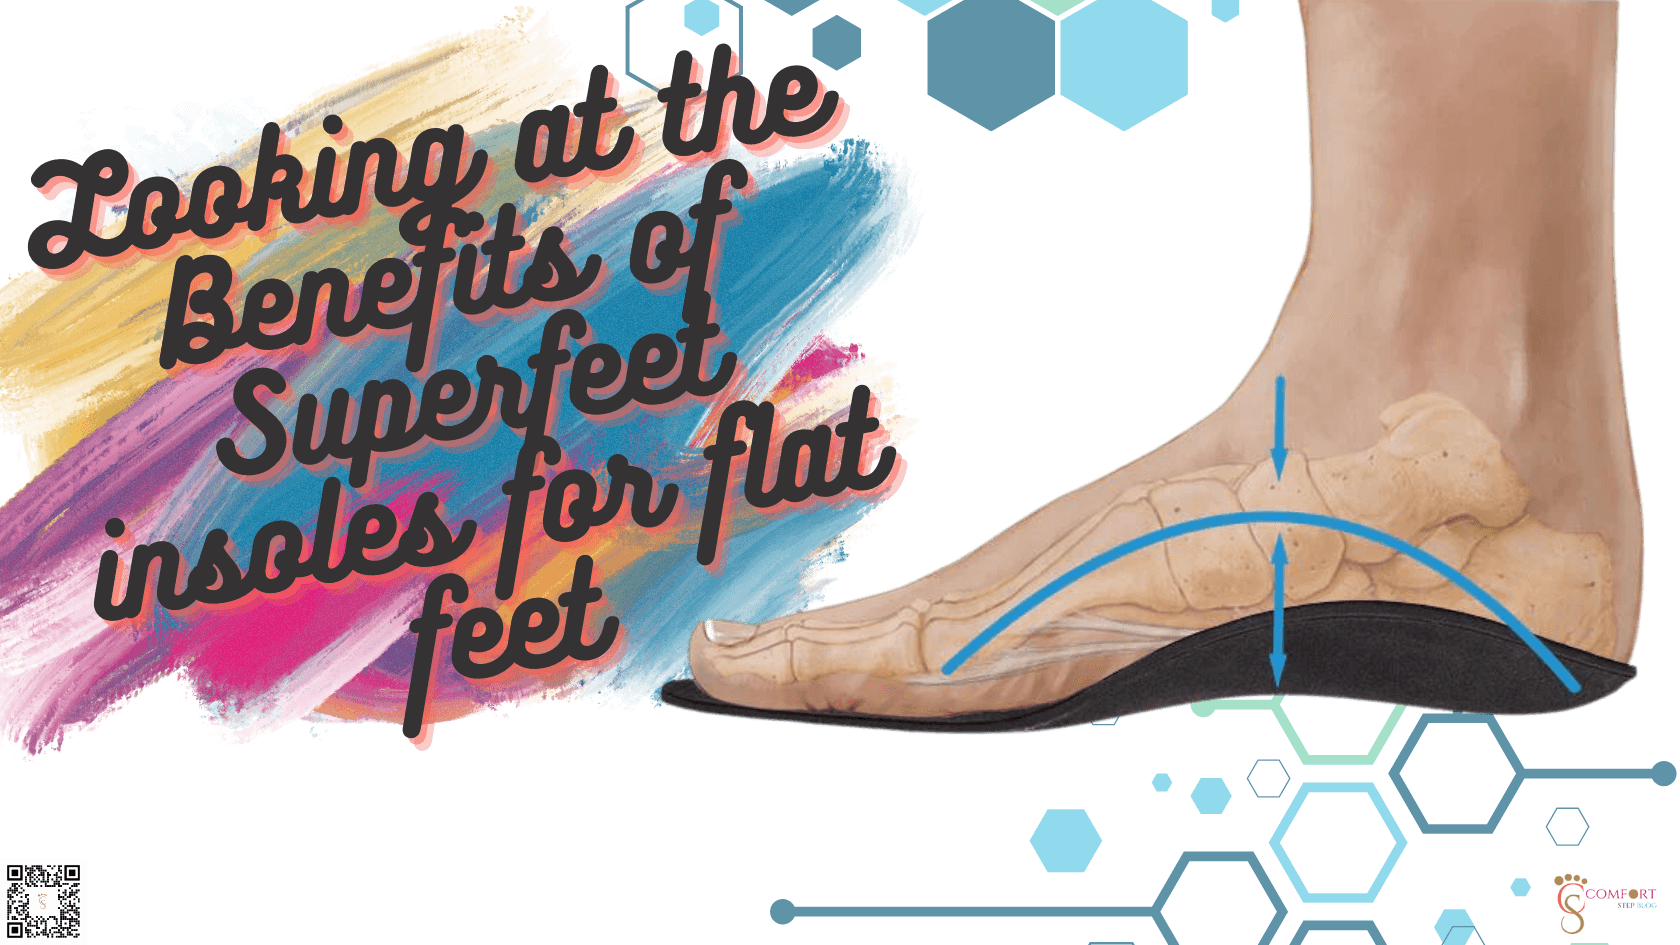 Looking at the Benefits of Superfeet insoles for flat feet